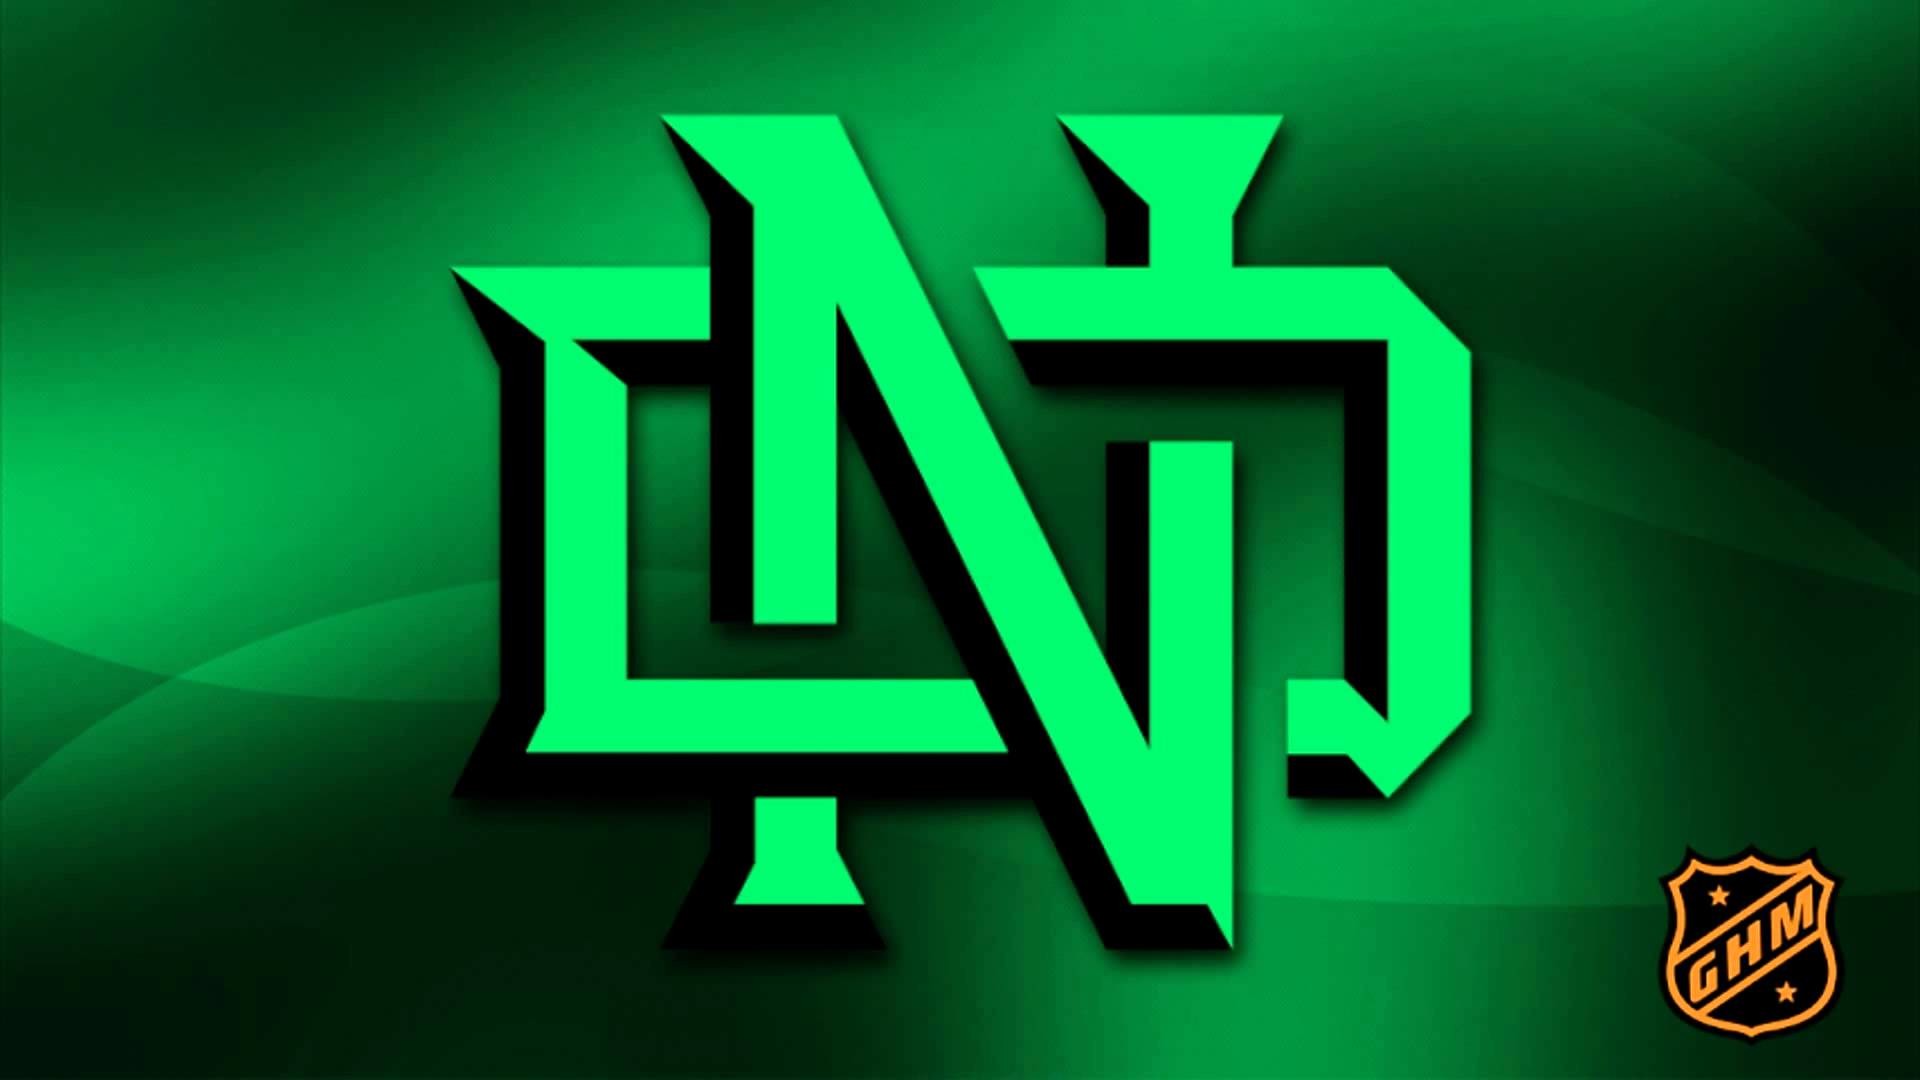 1920x1080 Fighting Sioux Hockey Wallpaper - Viewing Gallery